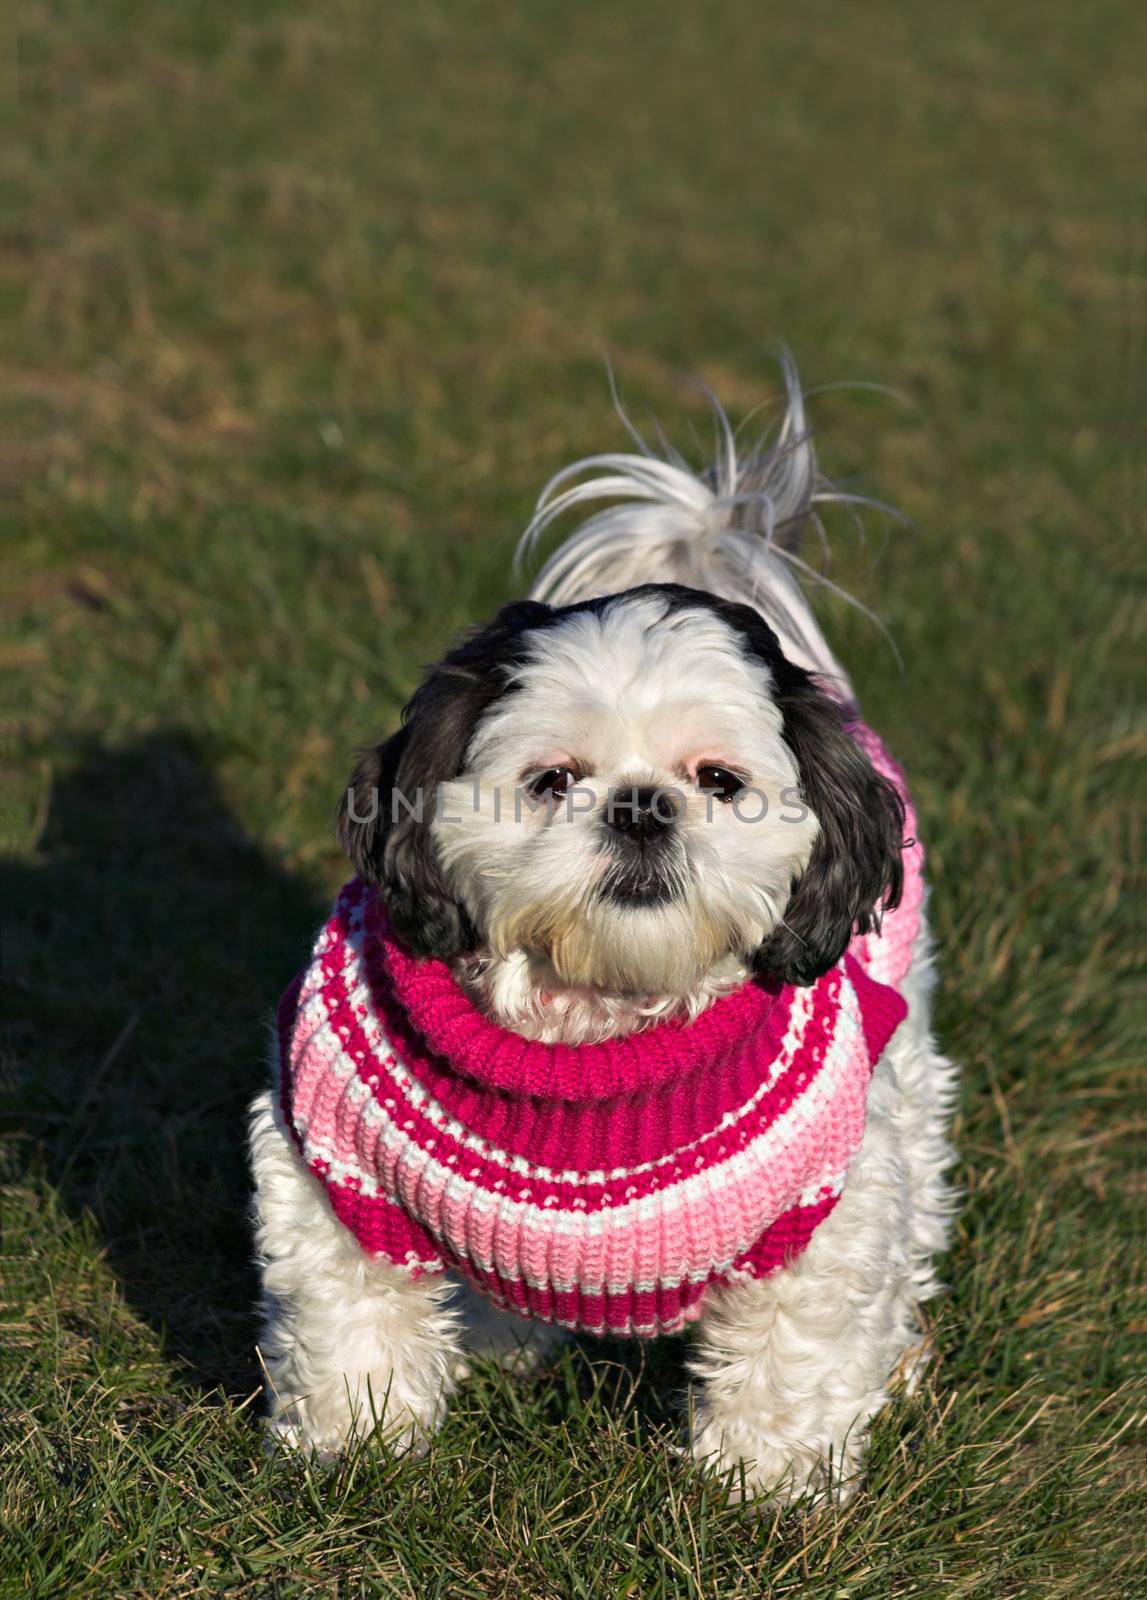 A white and black Shih Tzu in a pink, red, and white sweater on a grass background. Copy space exists at the top of the photo.